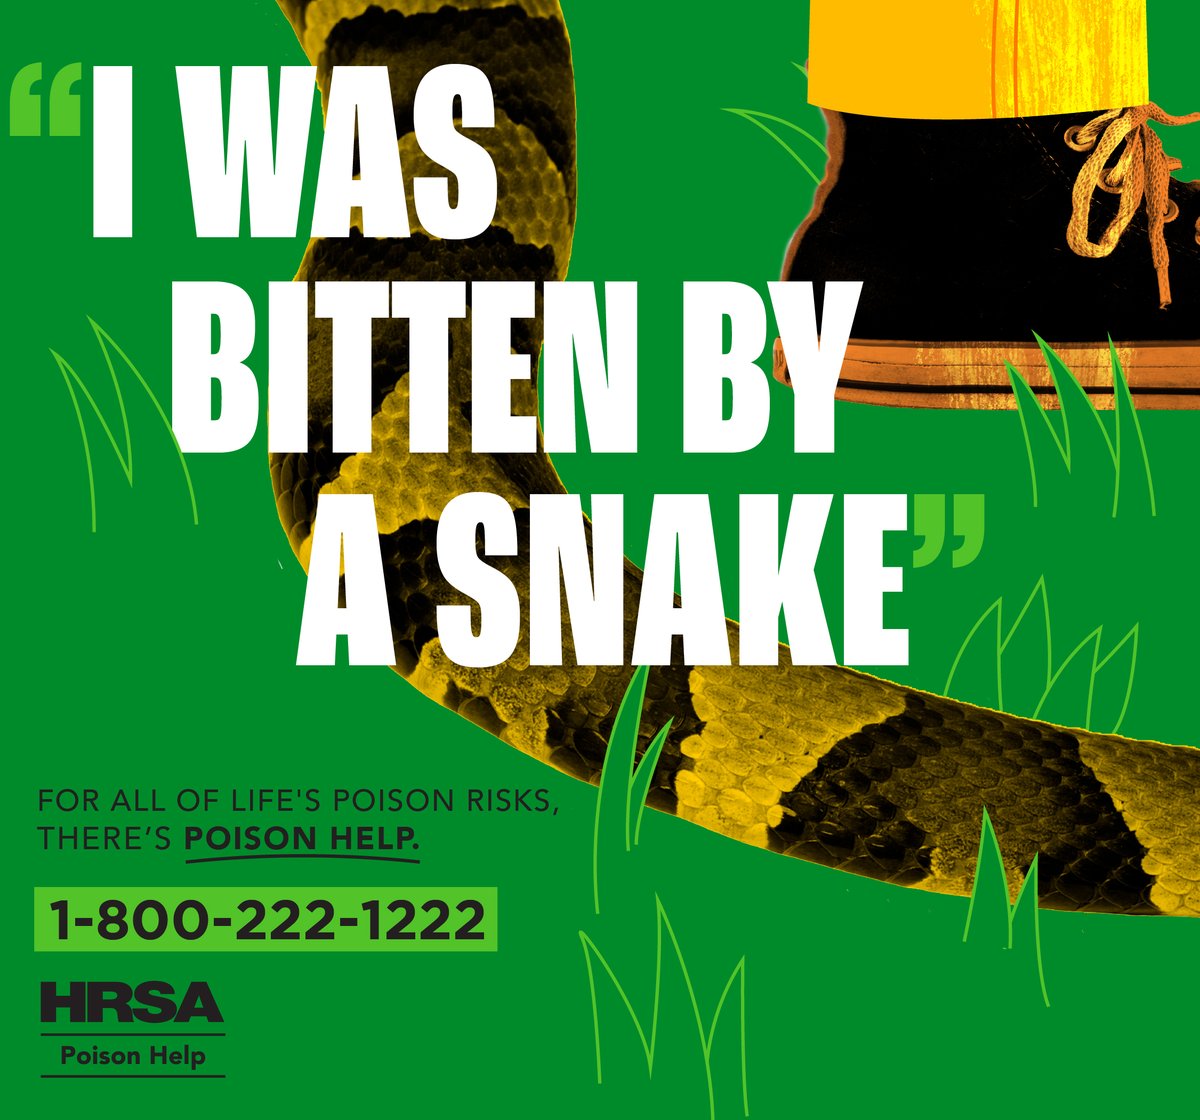 This National Poison Prevention Week, remember that not all bites are friendly! Whether it's a snake or any other venomous creature, quick action is crucial. Save the number for poison help: 1-800-222-122.  #SnakeBiteSafety #EmergencyAssistance #PreventPoison #StaySafe